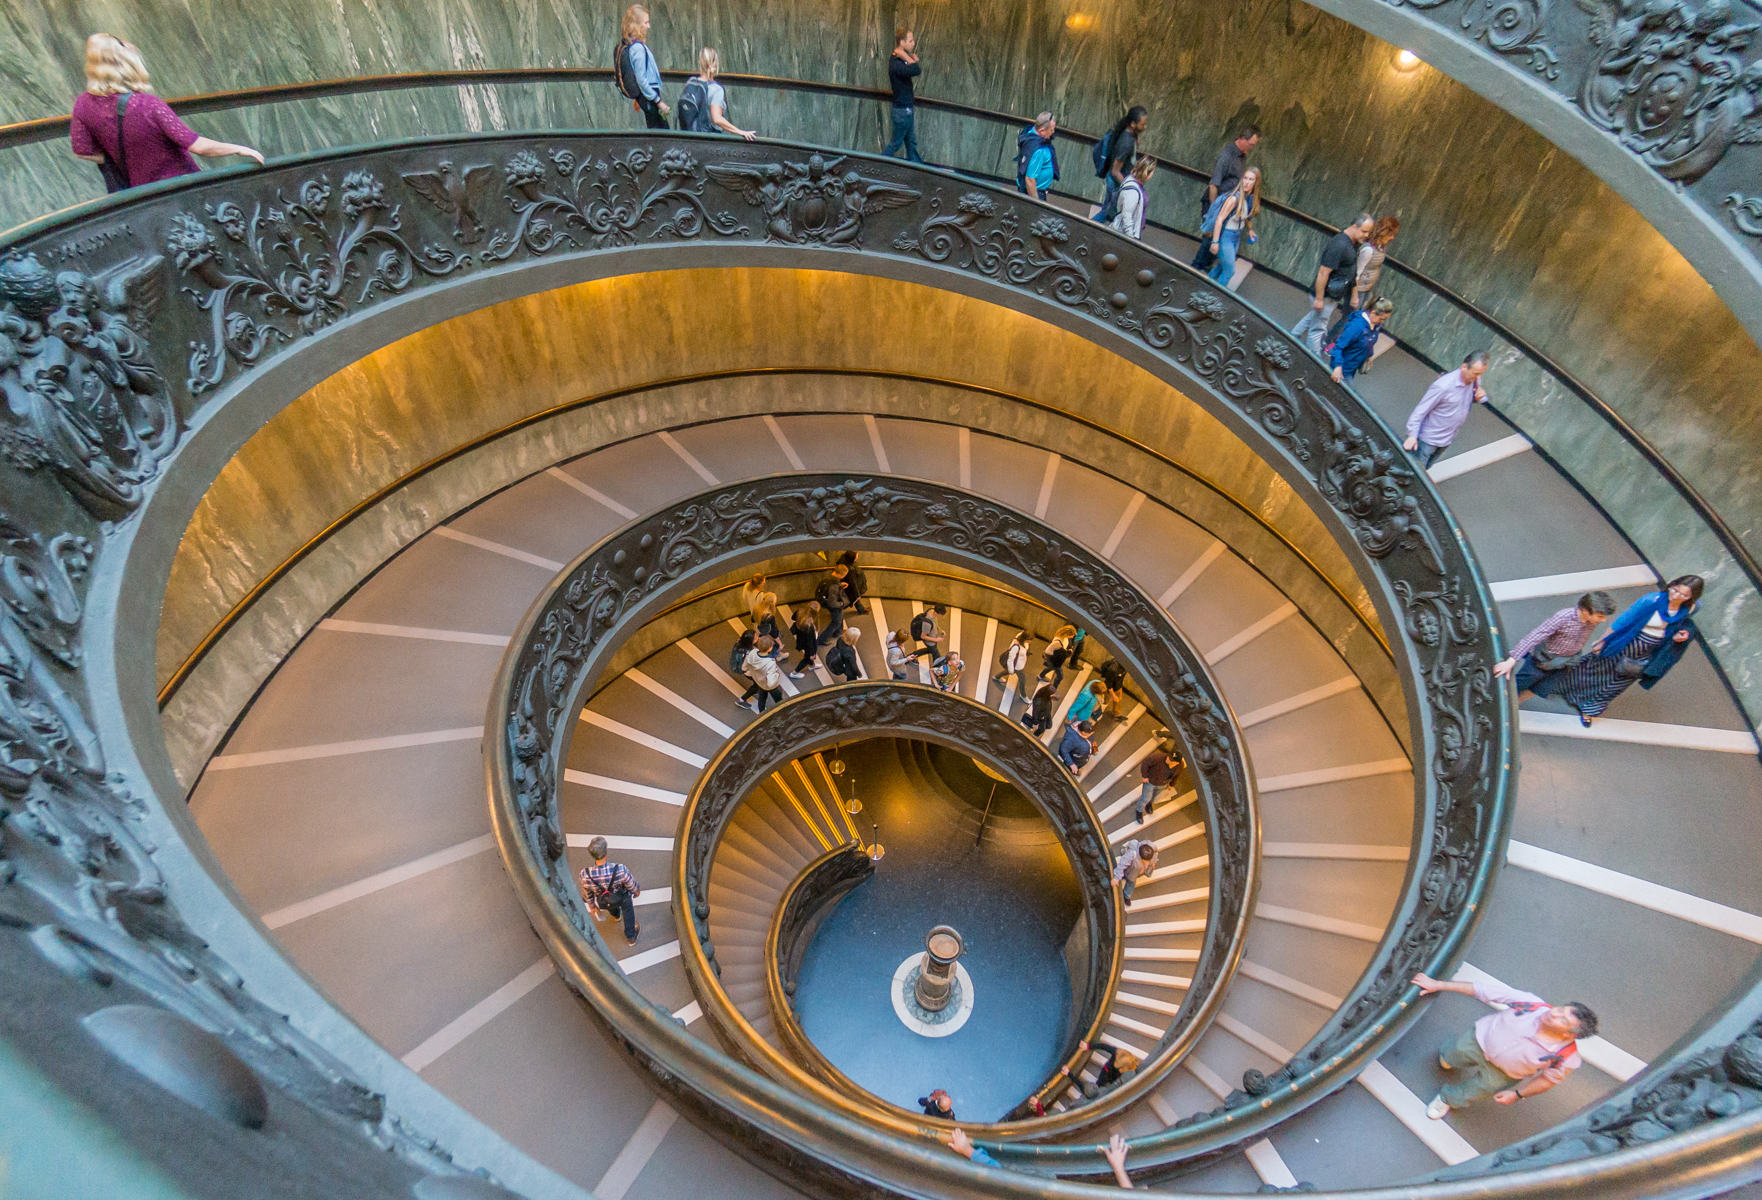 Visitors exit the Musei Vaticani (Vatican Museums) on the Bramante Staircase | Photo by Mike Hudak